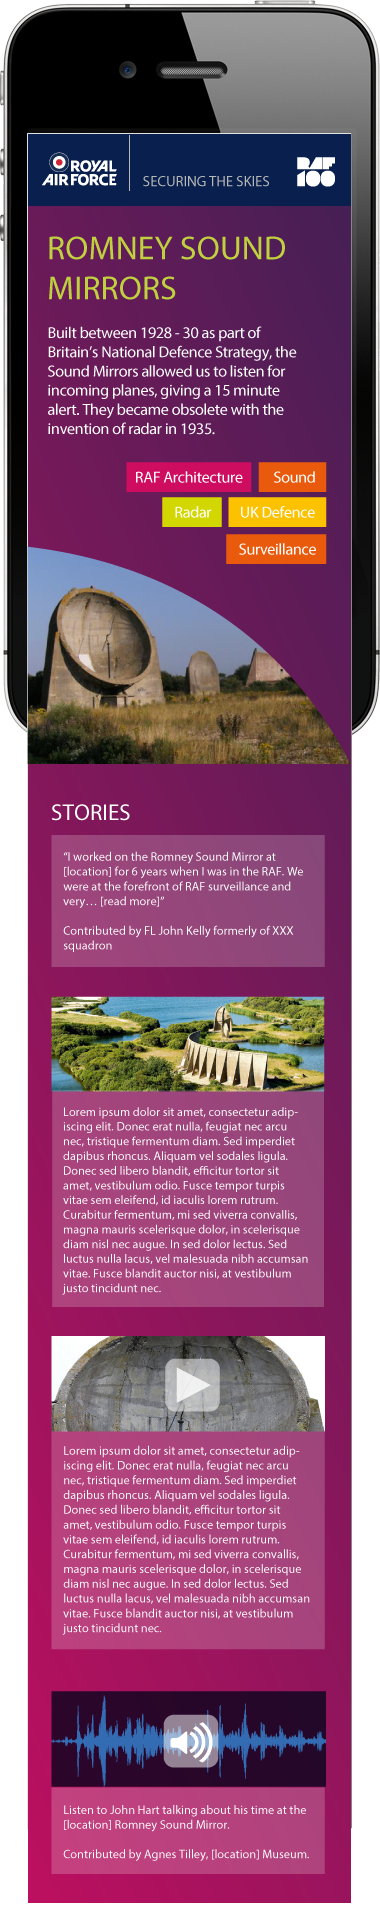 Romney Sound Mirrors object page - mobile 